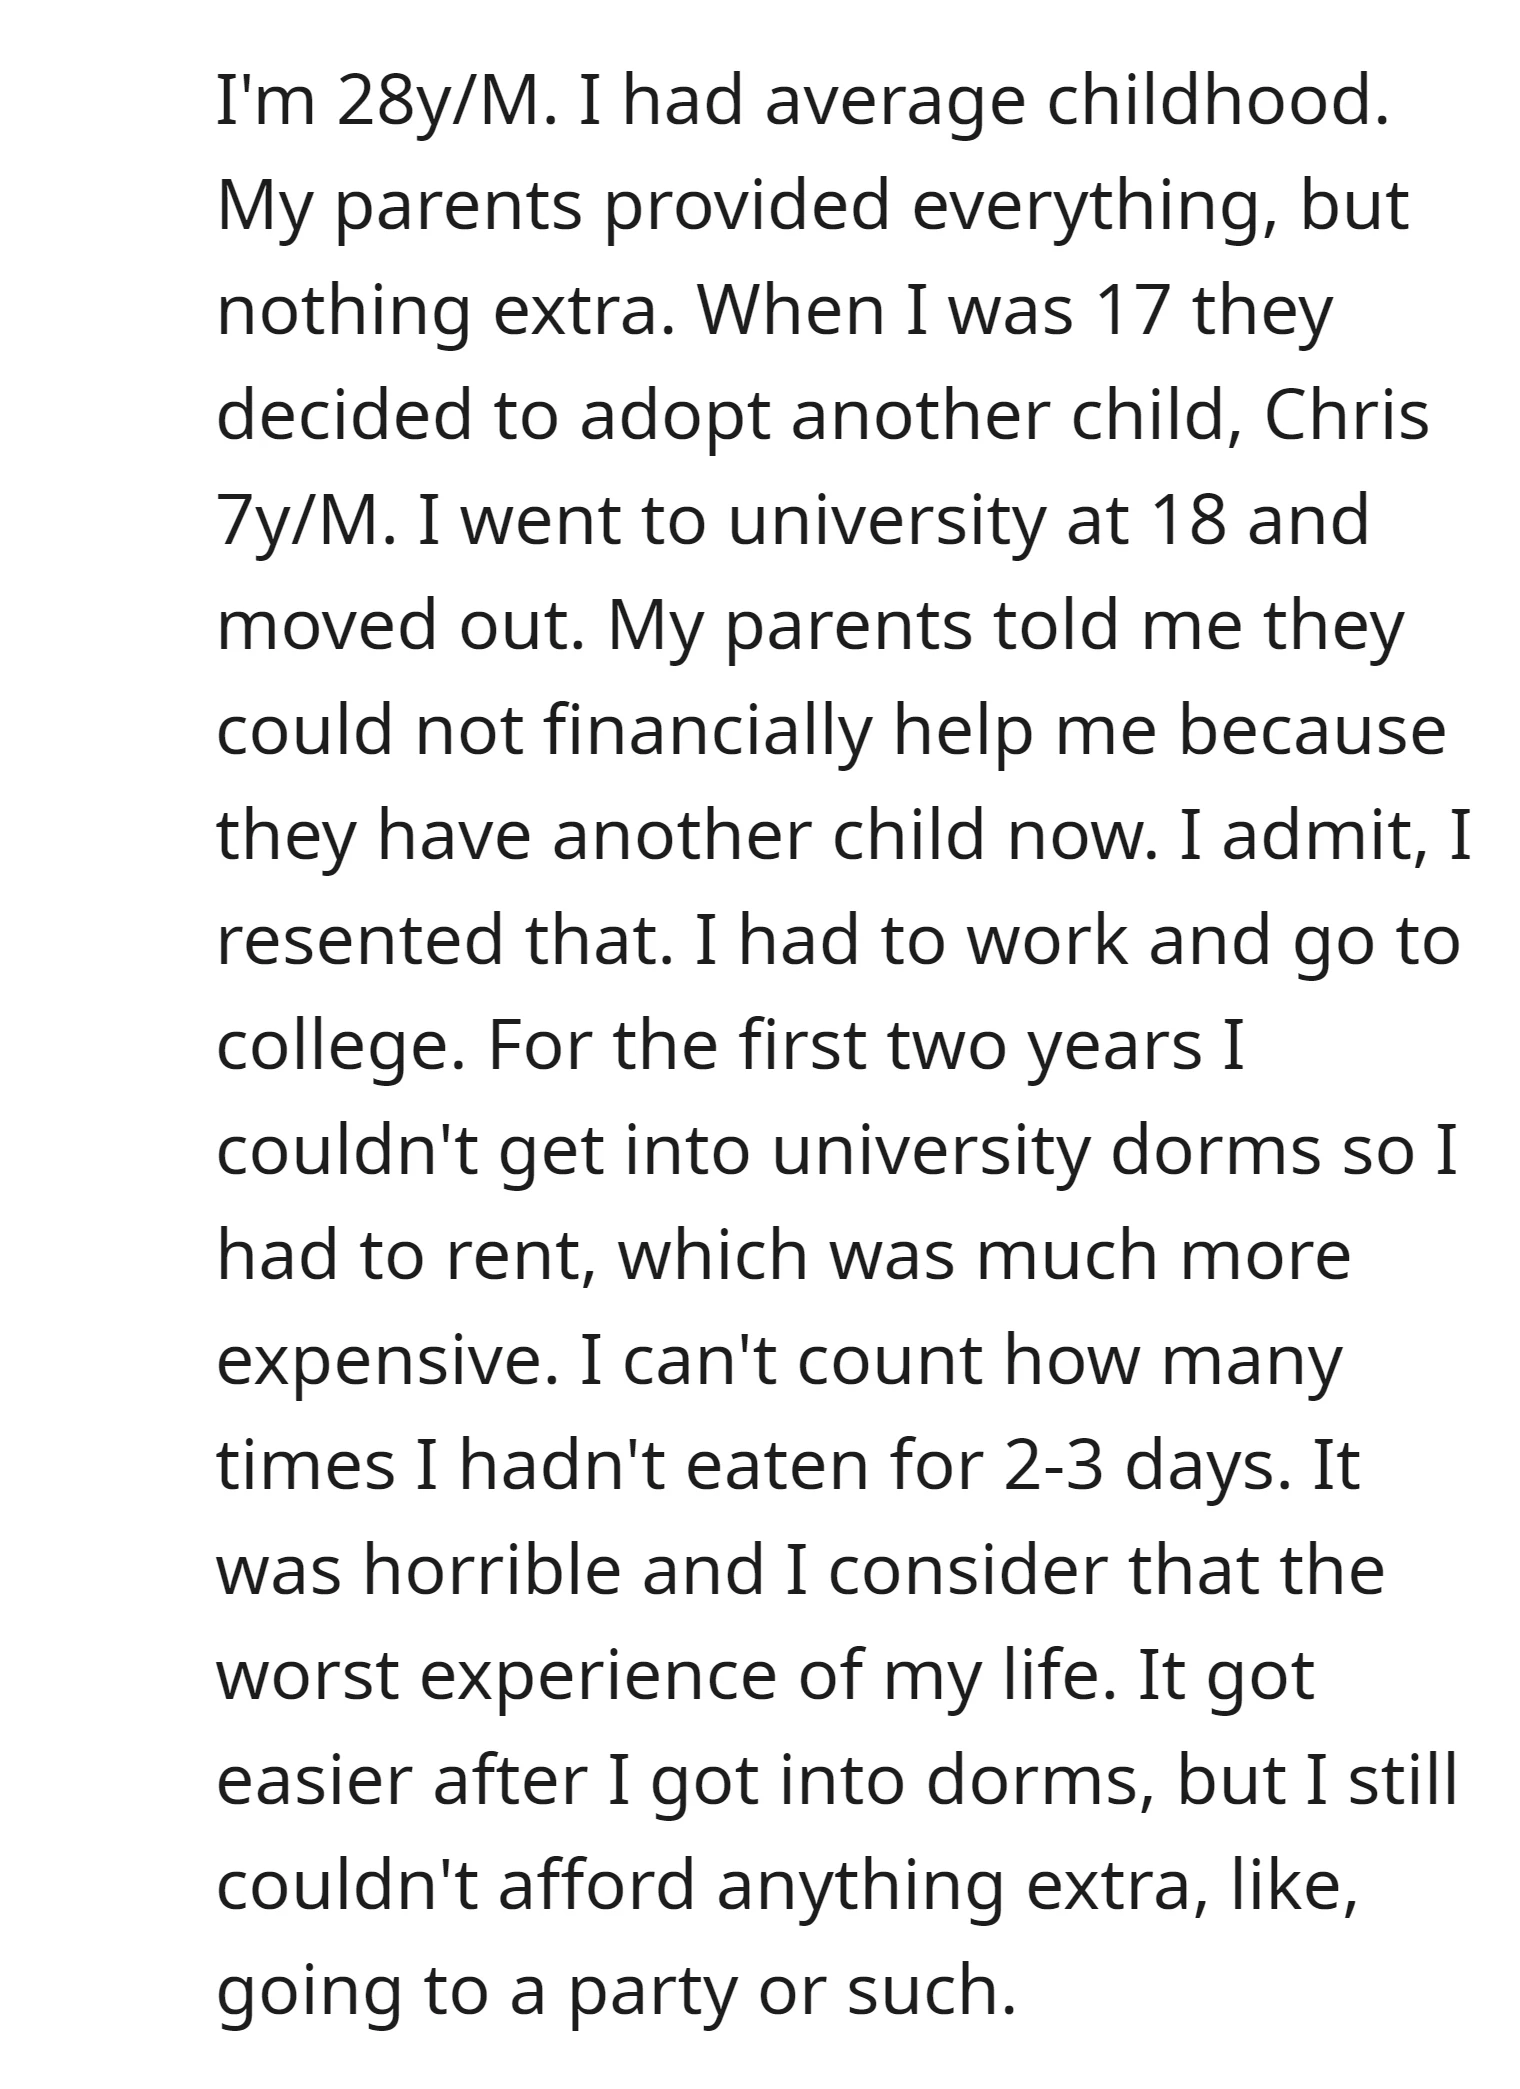 OP faced financial struggles during university due to lack of parental support after they adopted a younger sibling